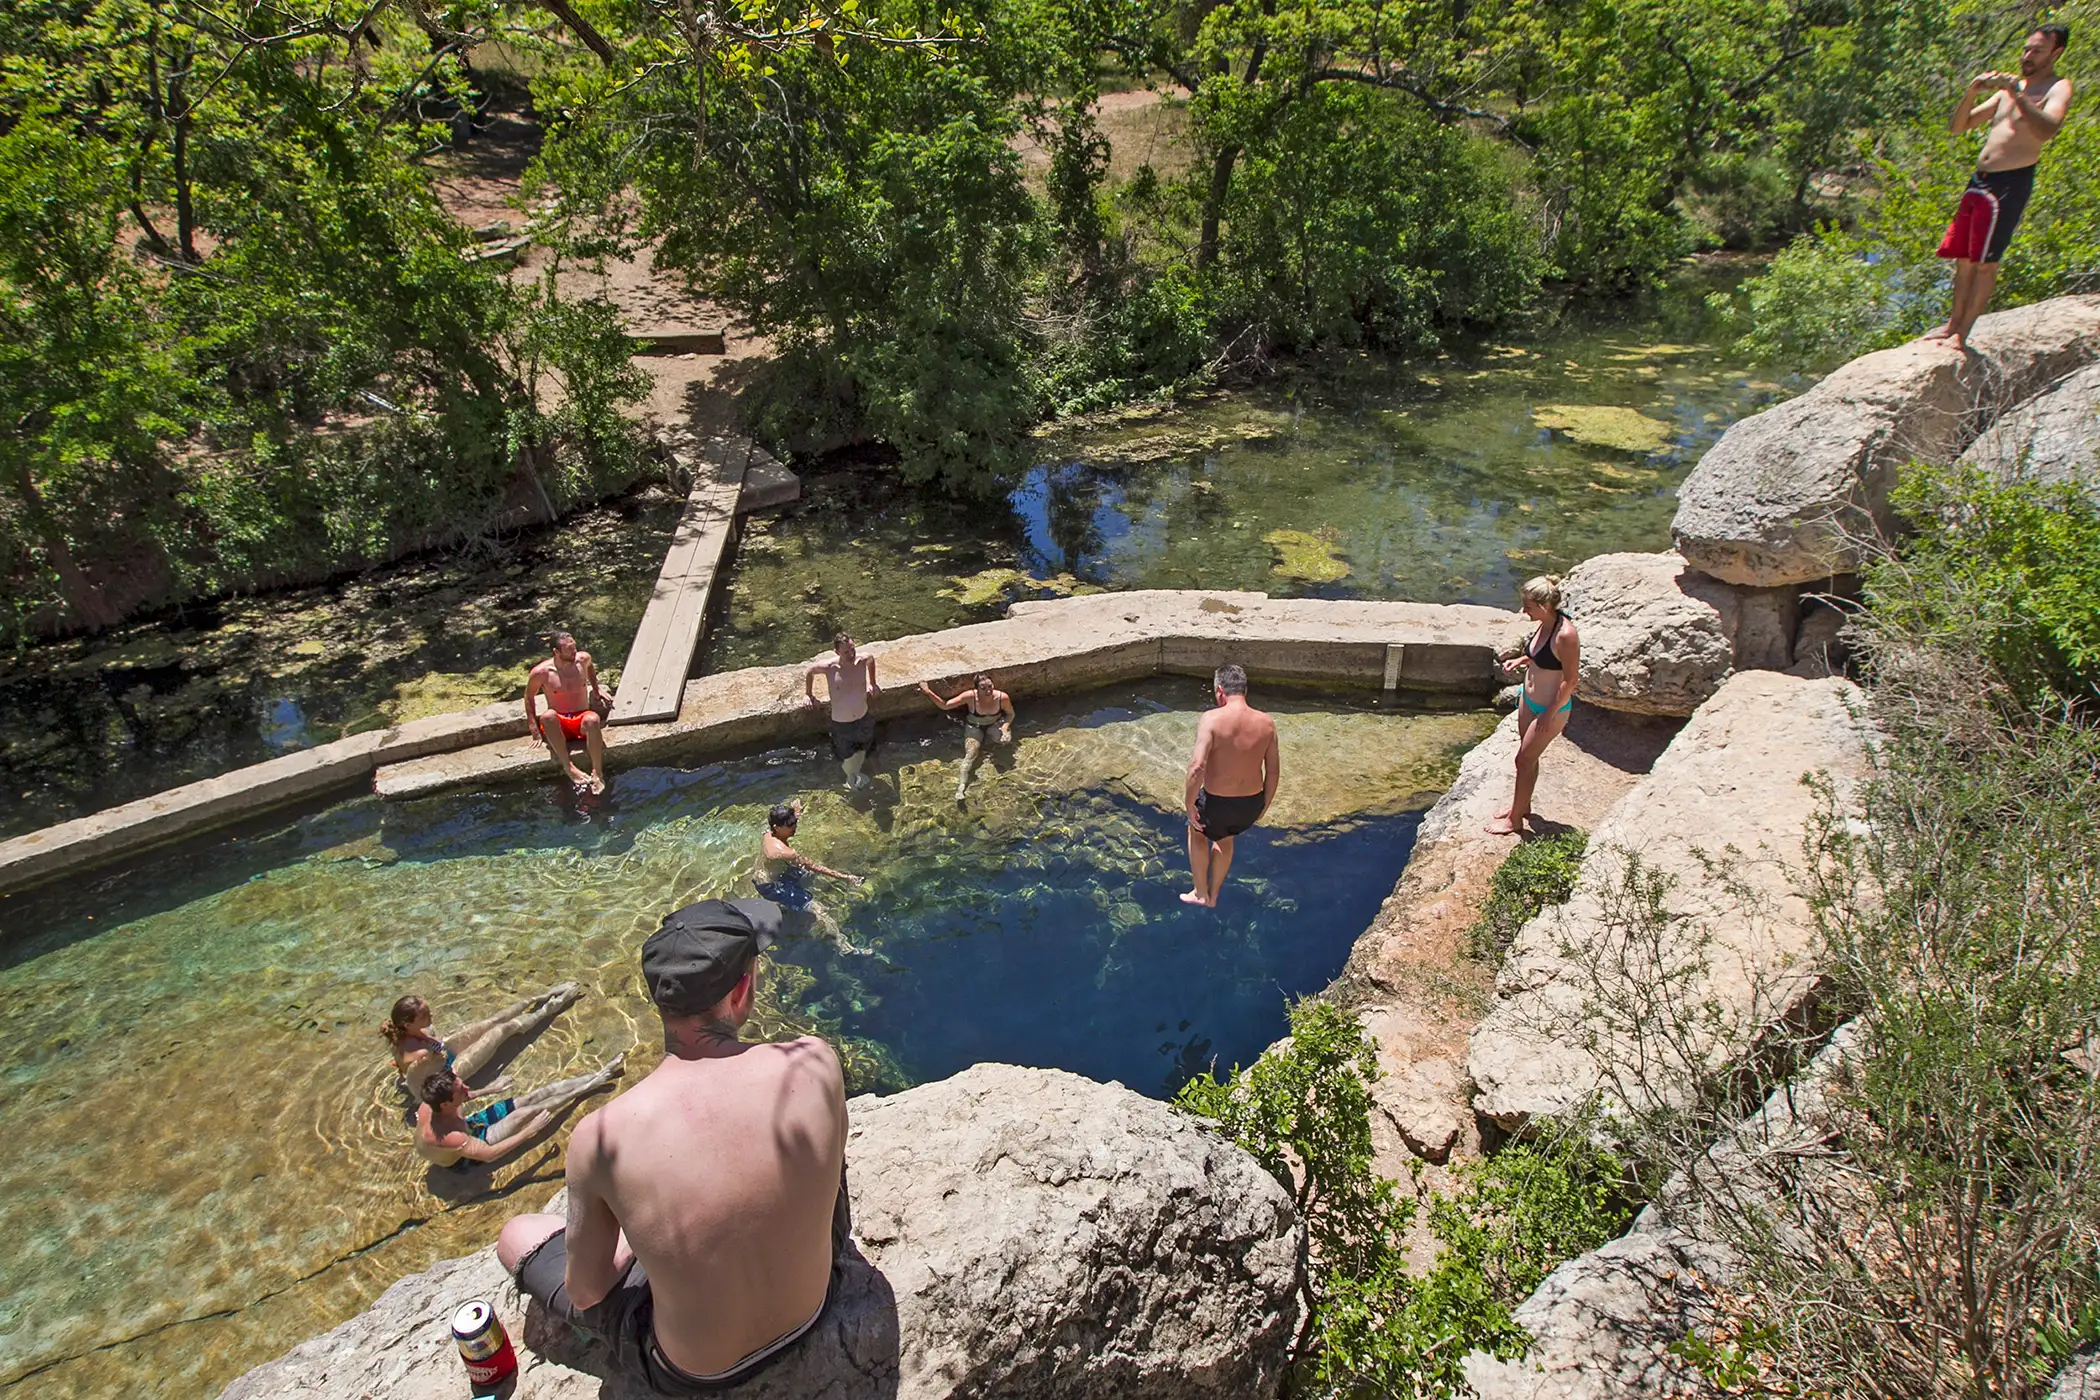 Visitors to Hays County's Jacob's Well Natural Area look on as a man leaps from the bluffs, aiming for the 12-foot cave opening though it is against park rules, in Wimberley, Texas, on Wednesday, April 30, 2014.